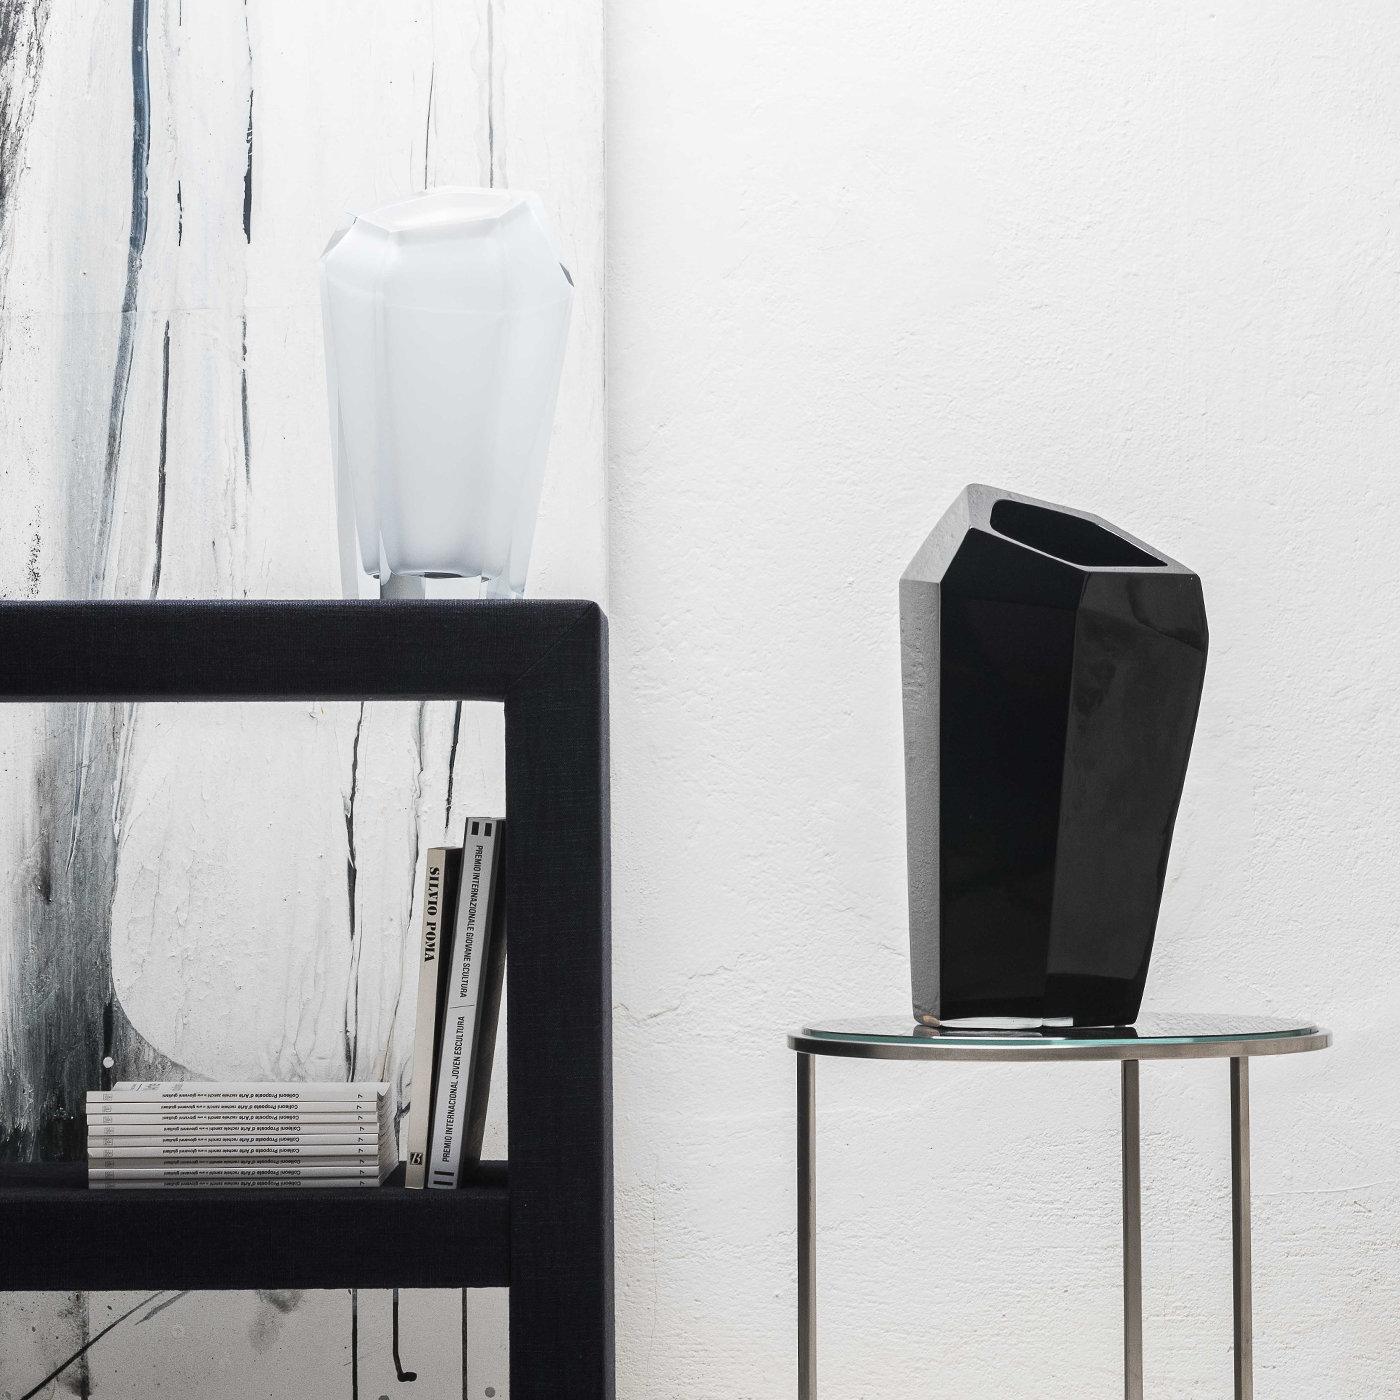 Designed by Karim Rashid, this extra-large vase was conceived as part of a series of containers of different shapes and sizes, distinctive for their multi-faceted silhouettes that reflect the surrounding light in striking and always new ways.